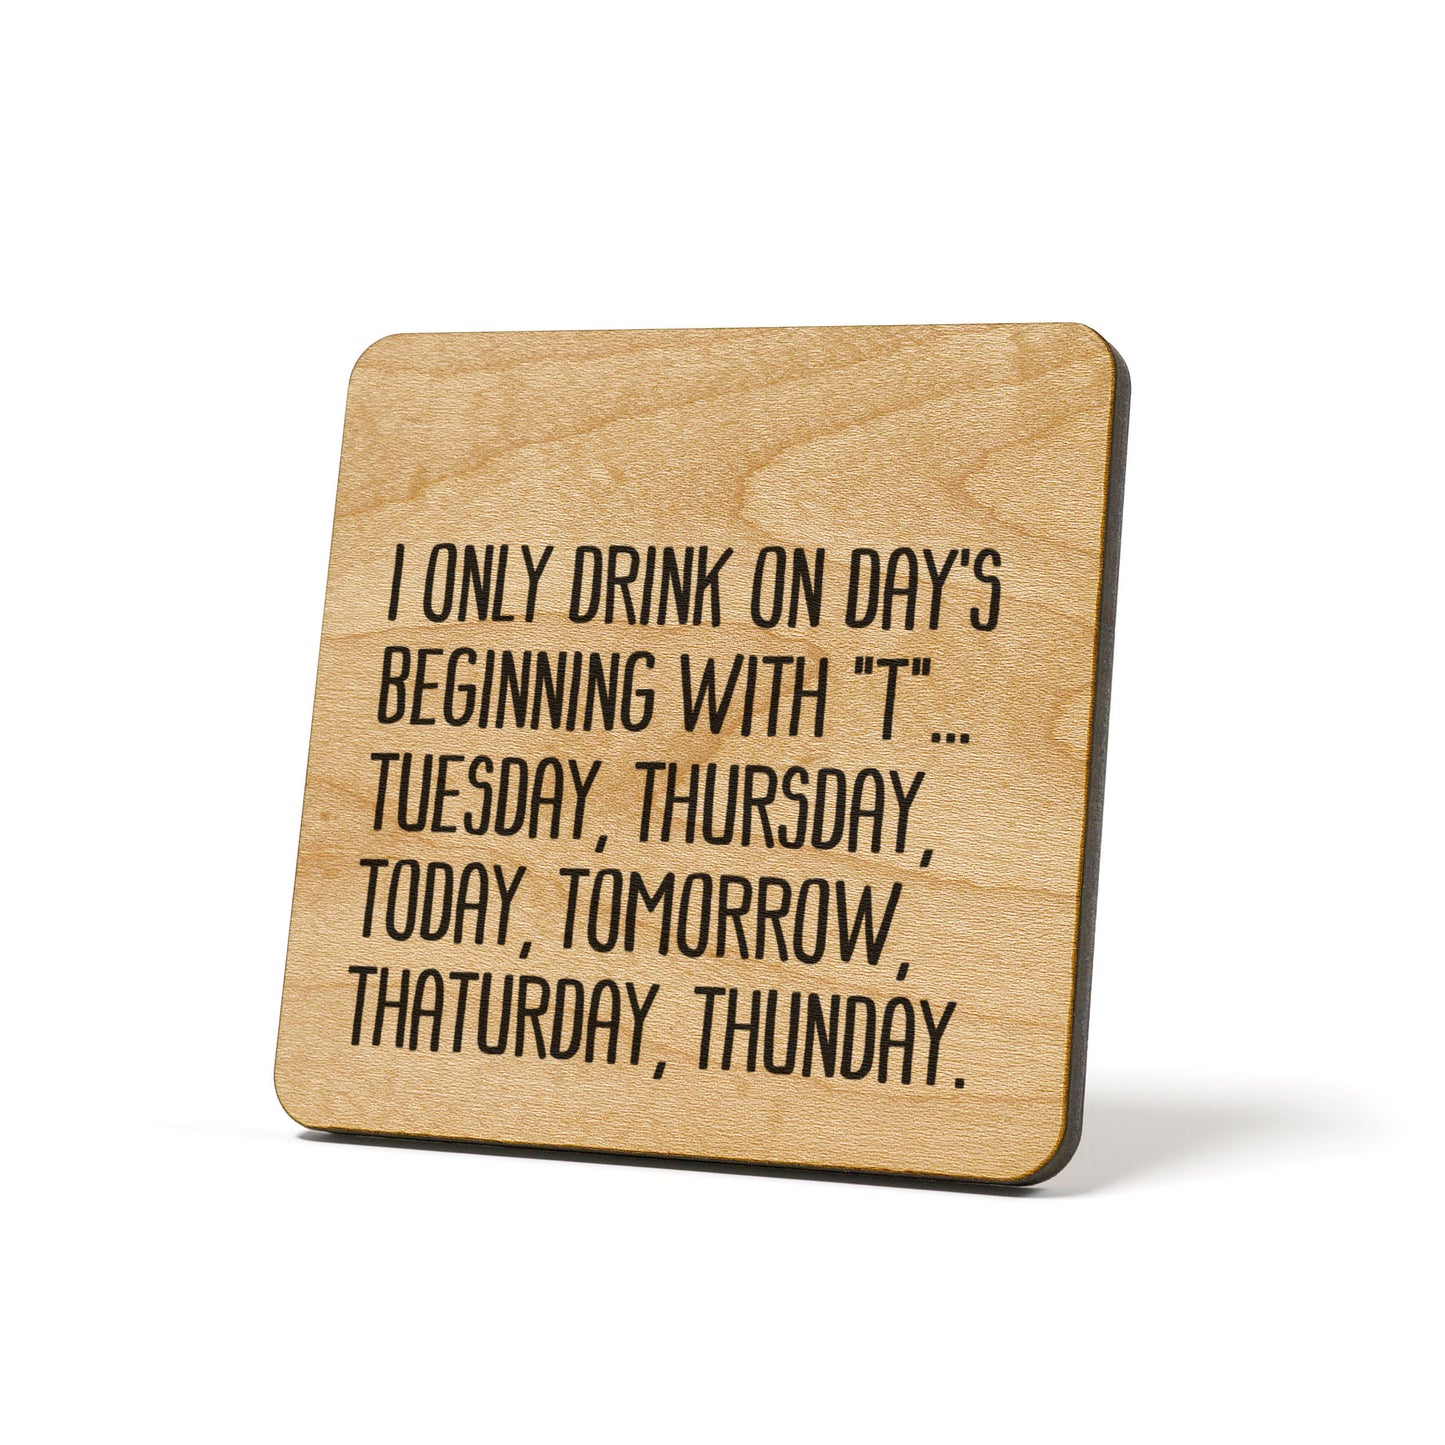 I only drink on day's beginning with "T" ... Quote Coaster